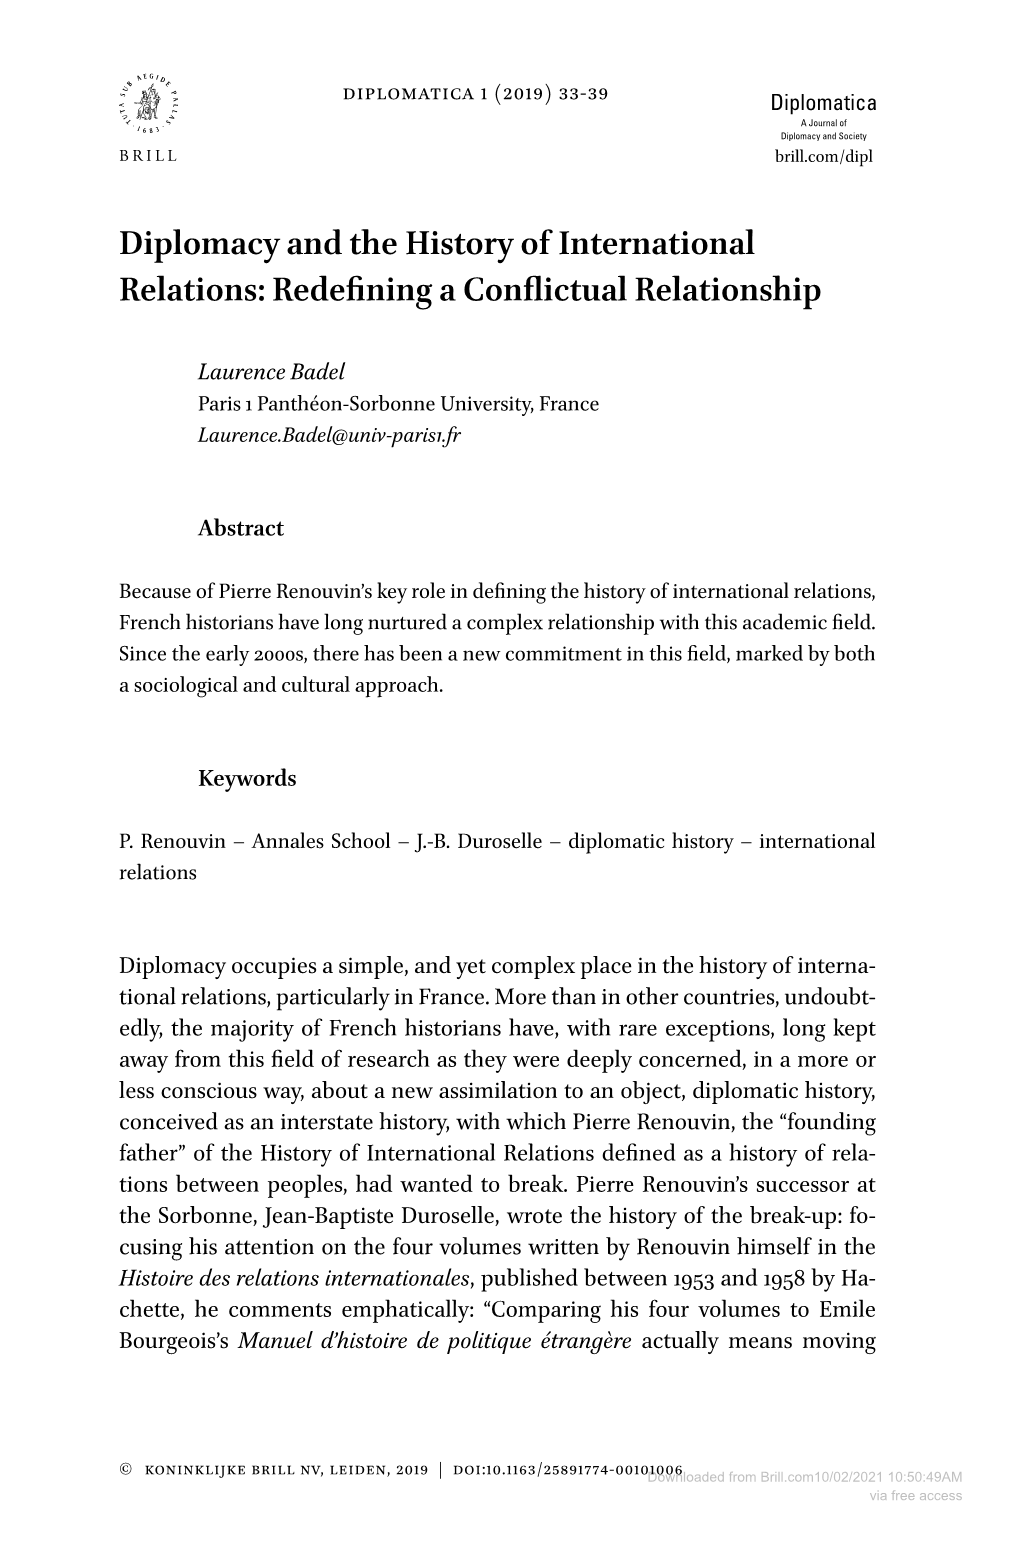 Diplomacy and the History of International Relations: Redefining a Conflictual Relationship